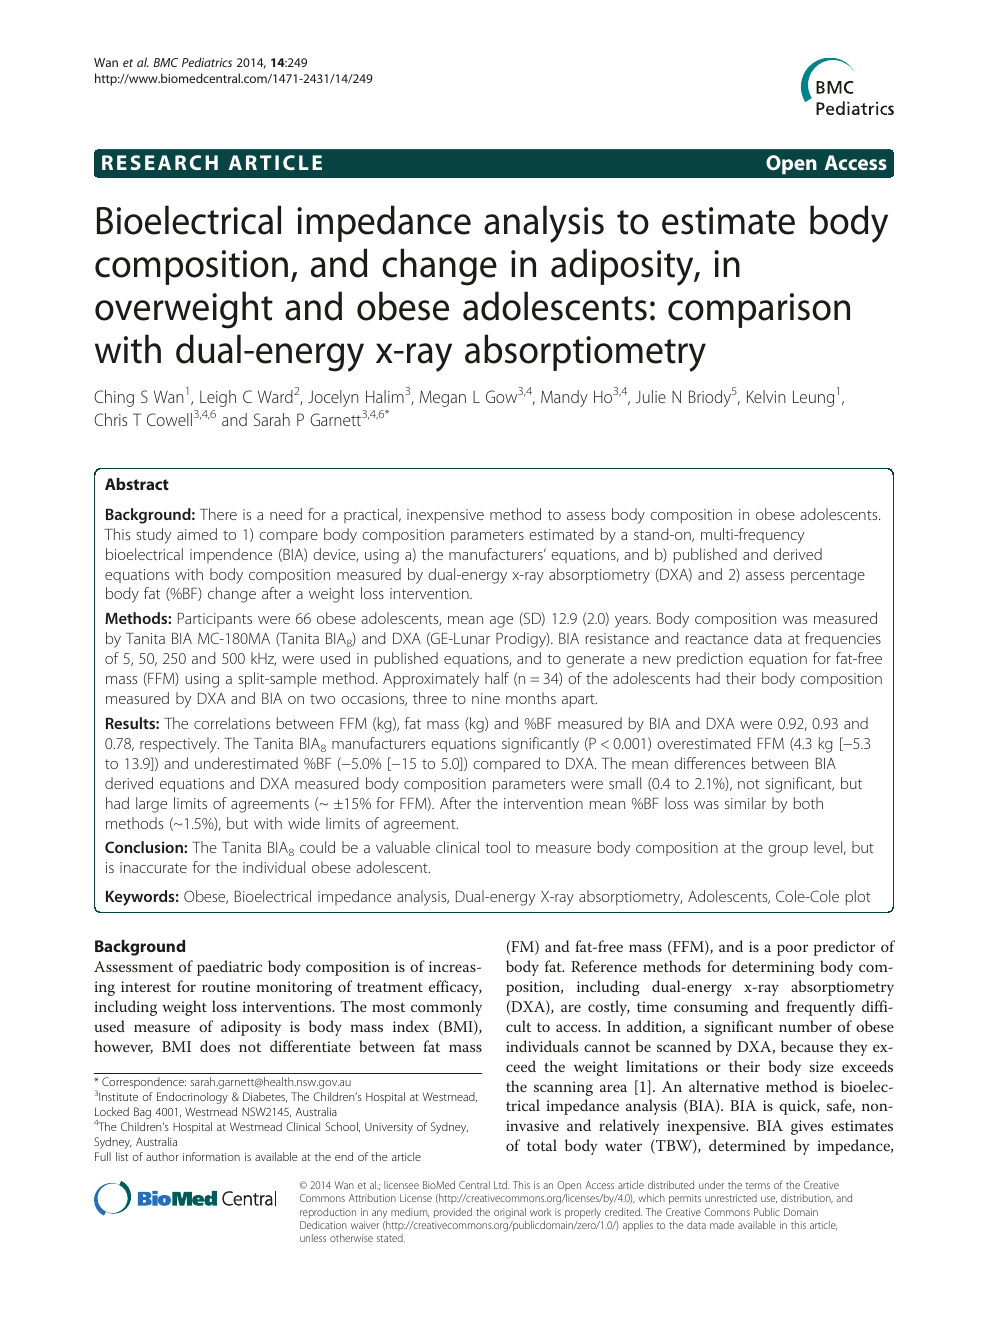 Percentage of Body Fat Assessment Using Bioelectrical Impedance